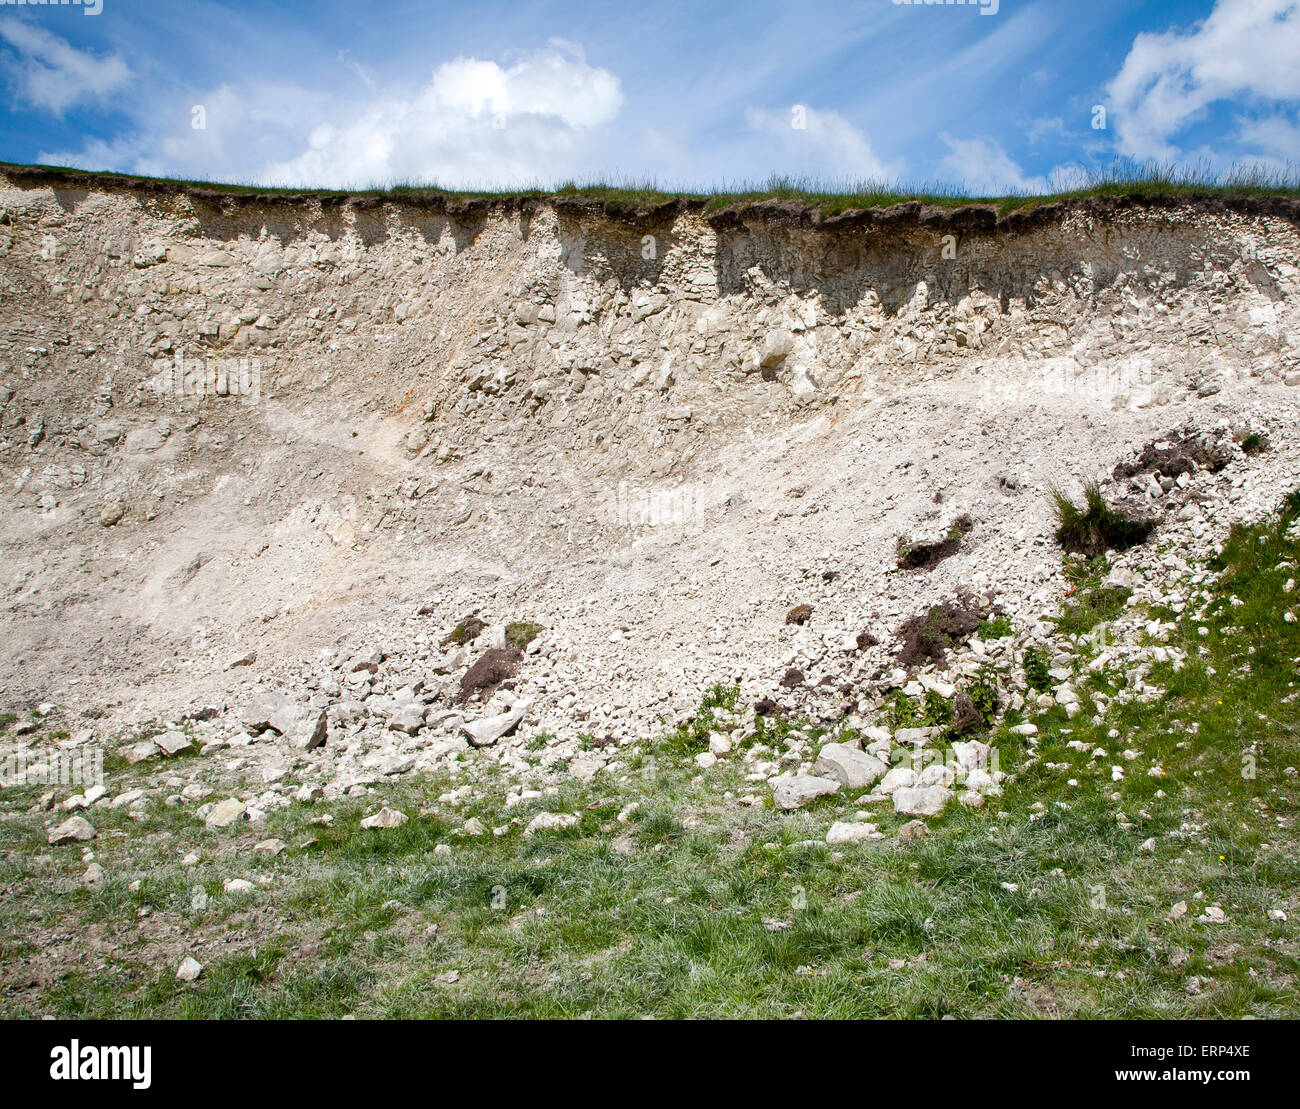 https://c8.alamy.com/comp/ERP4XE/soil-profile-cross-section-showing-thin-topsoil-layer-on-top-of-white-ERP4XE.jpg